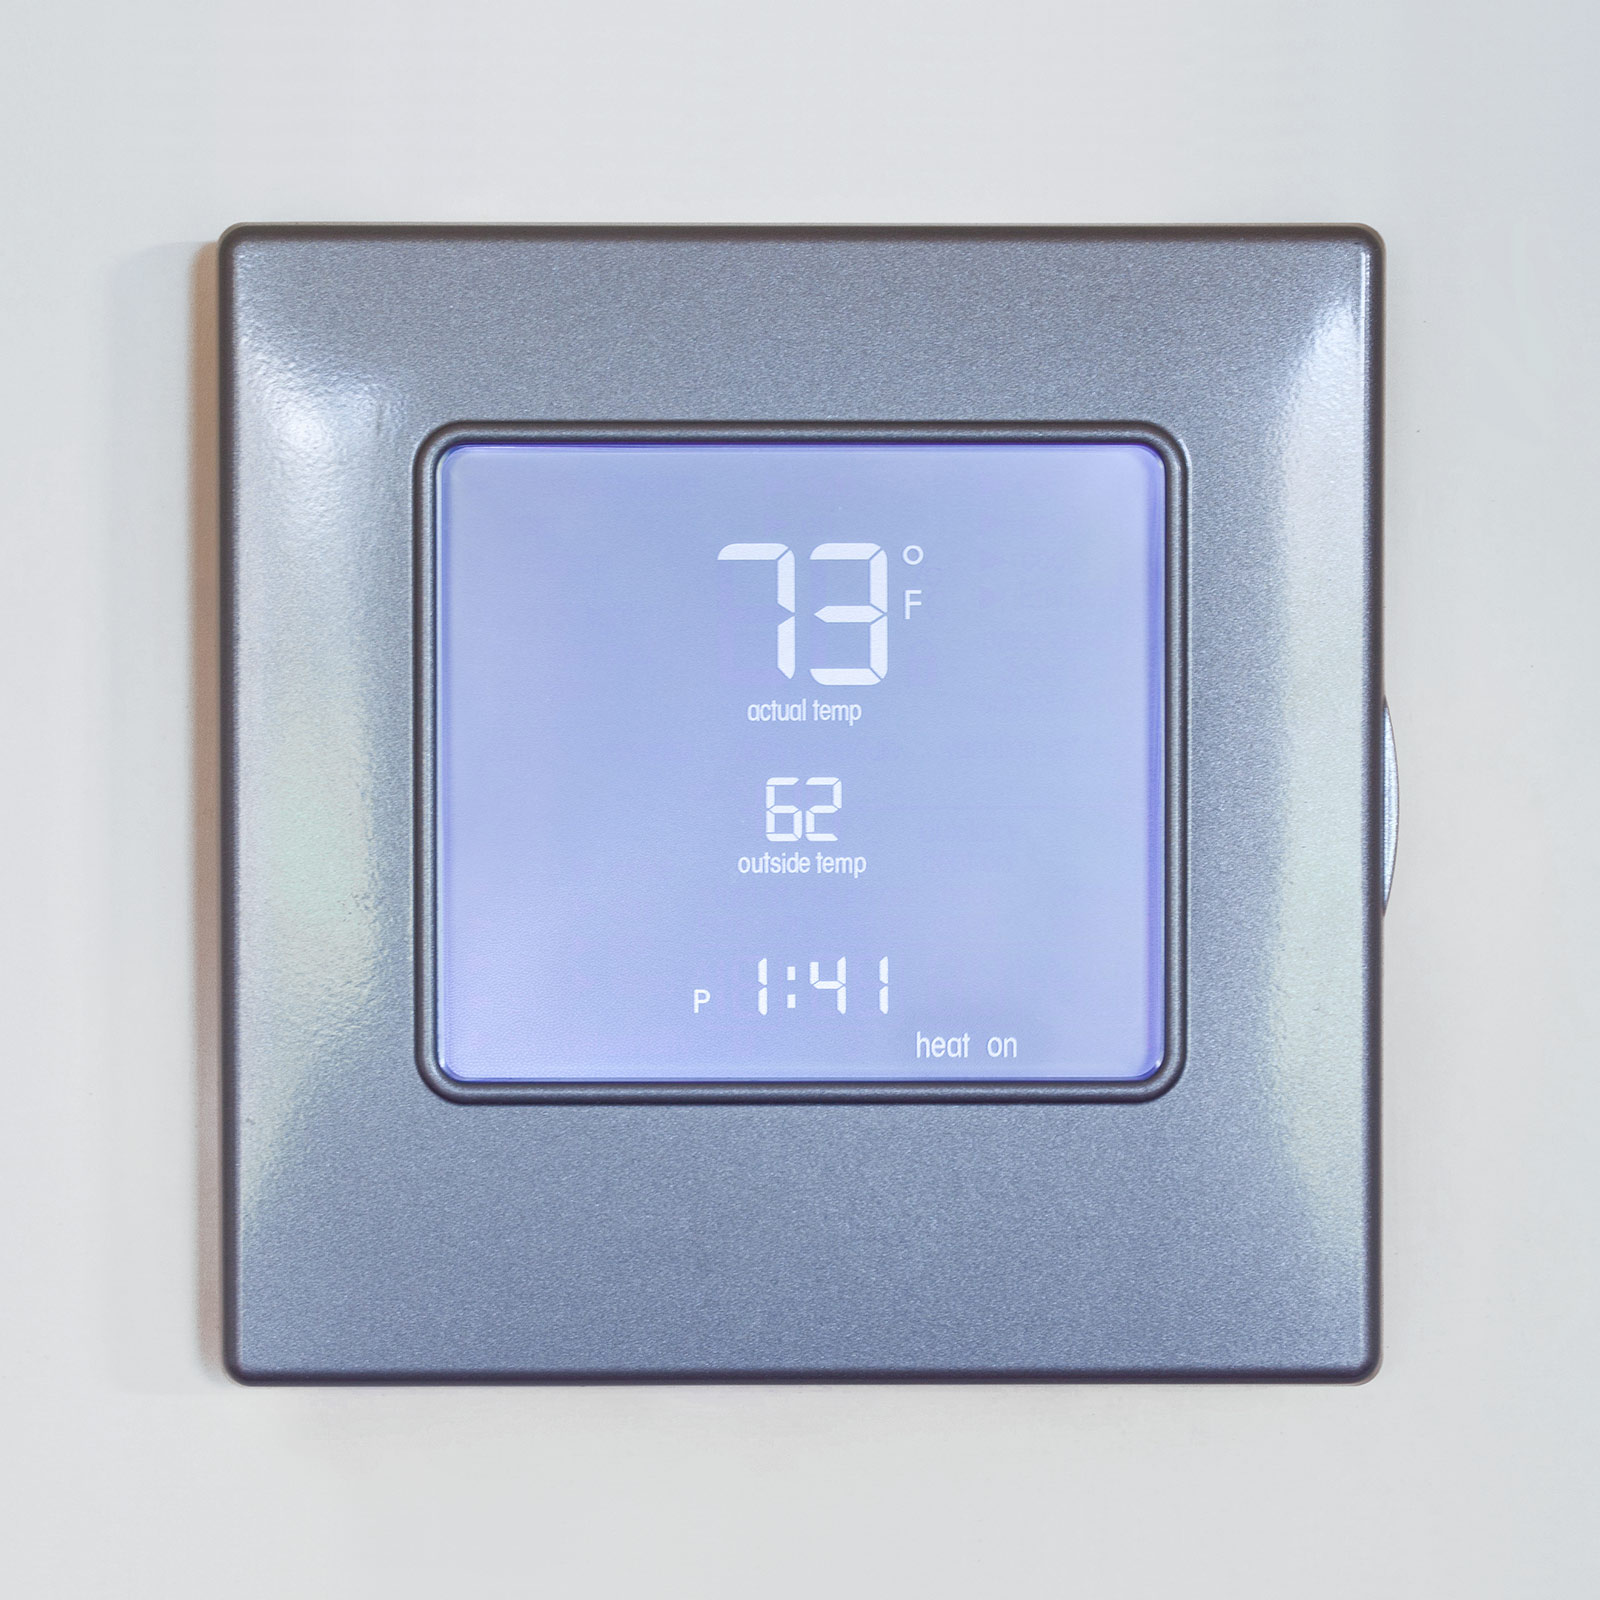 Room thermostat for panel heating with illuminated digital display